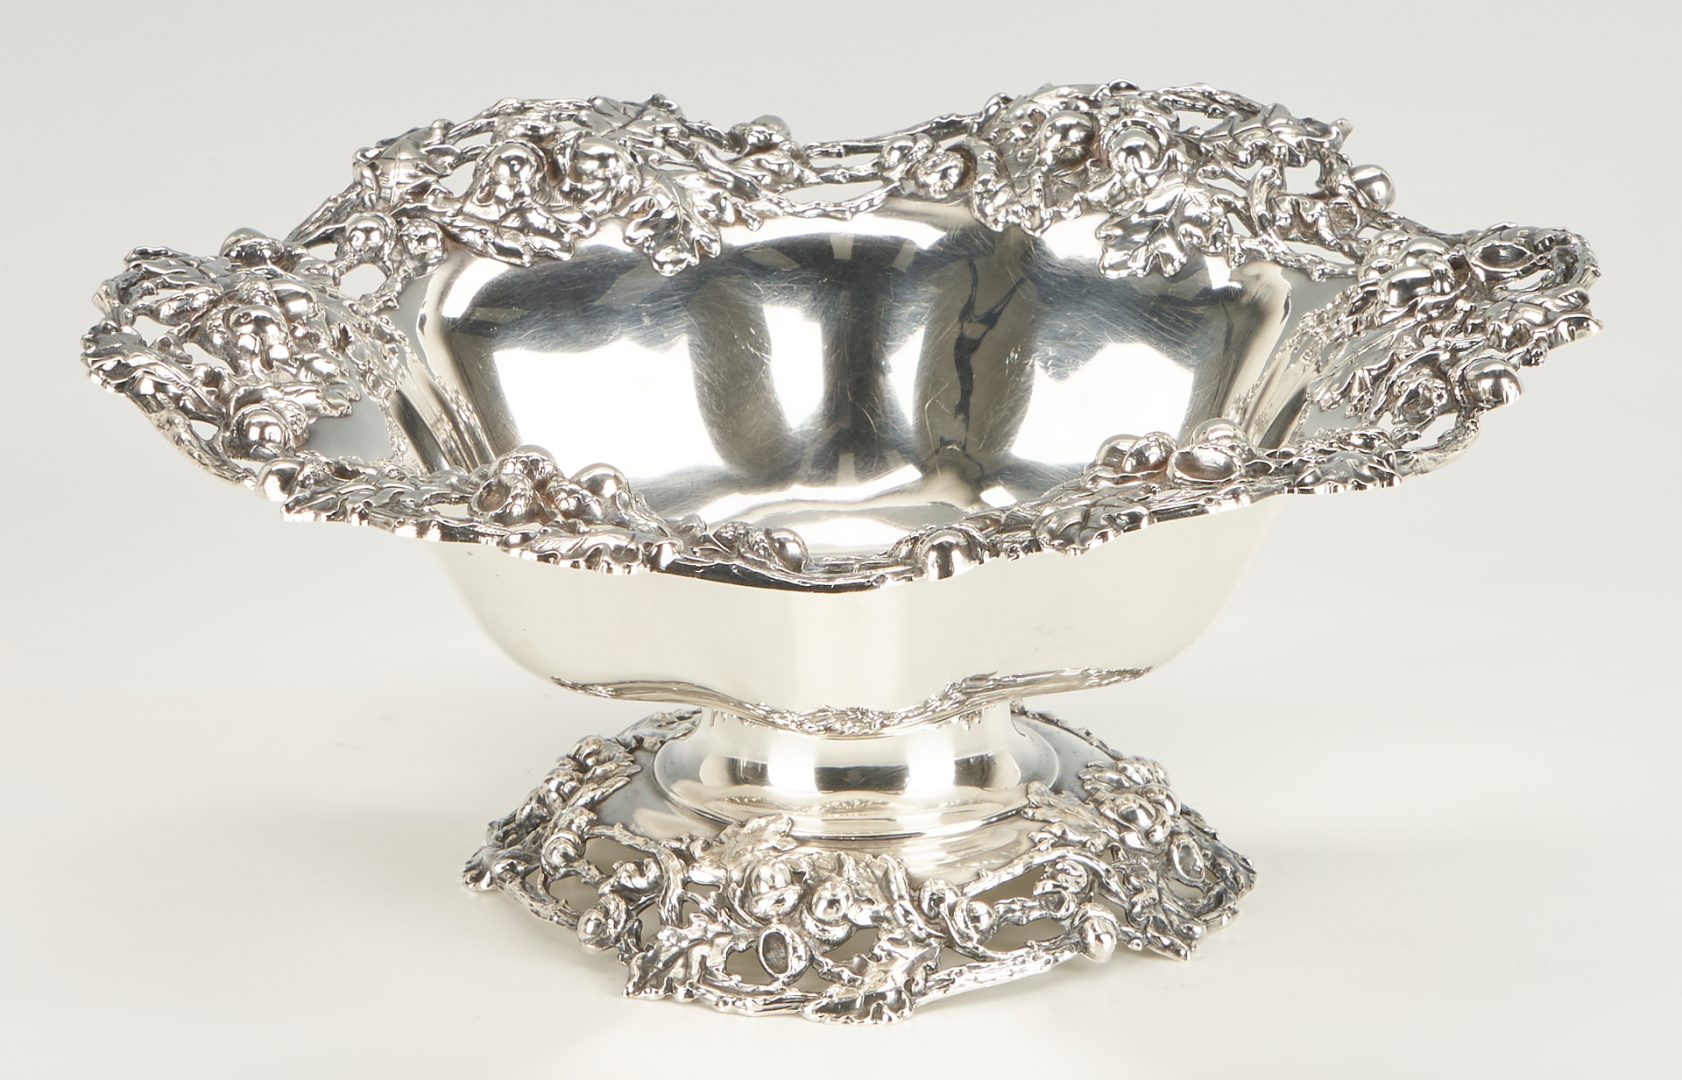 Lot 1248: Art Nouveau Sterling Silver Footed Bowl, Woodside